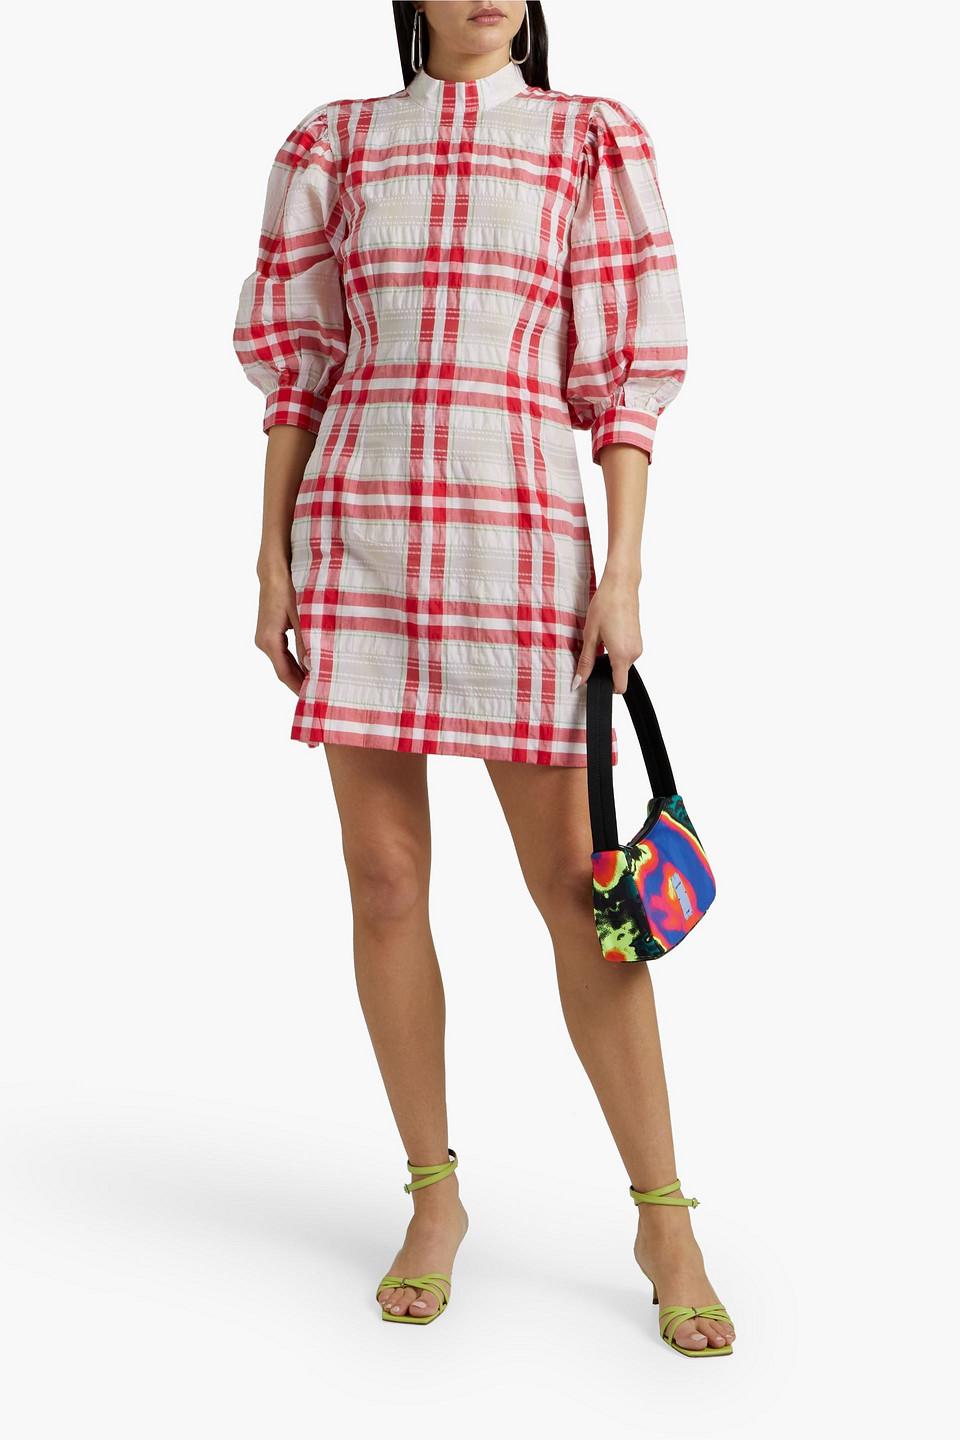 Ganni Checked Cotton-blend Mini Dress in Pink | Lyst